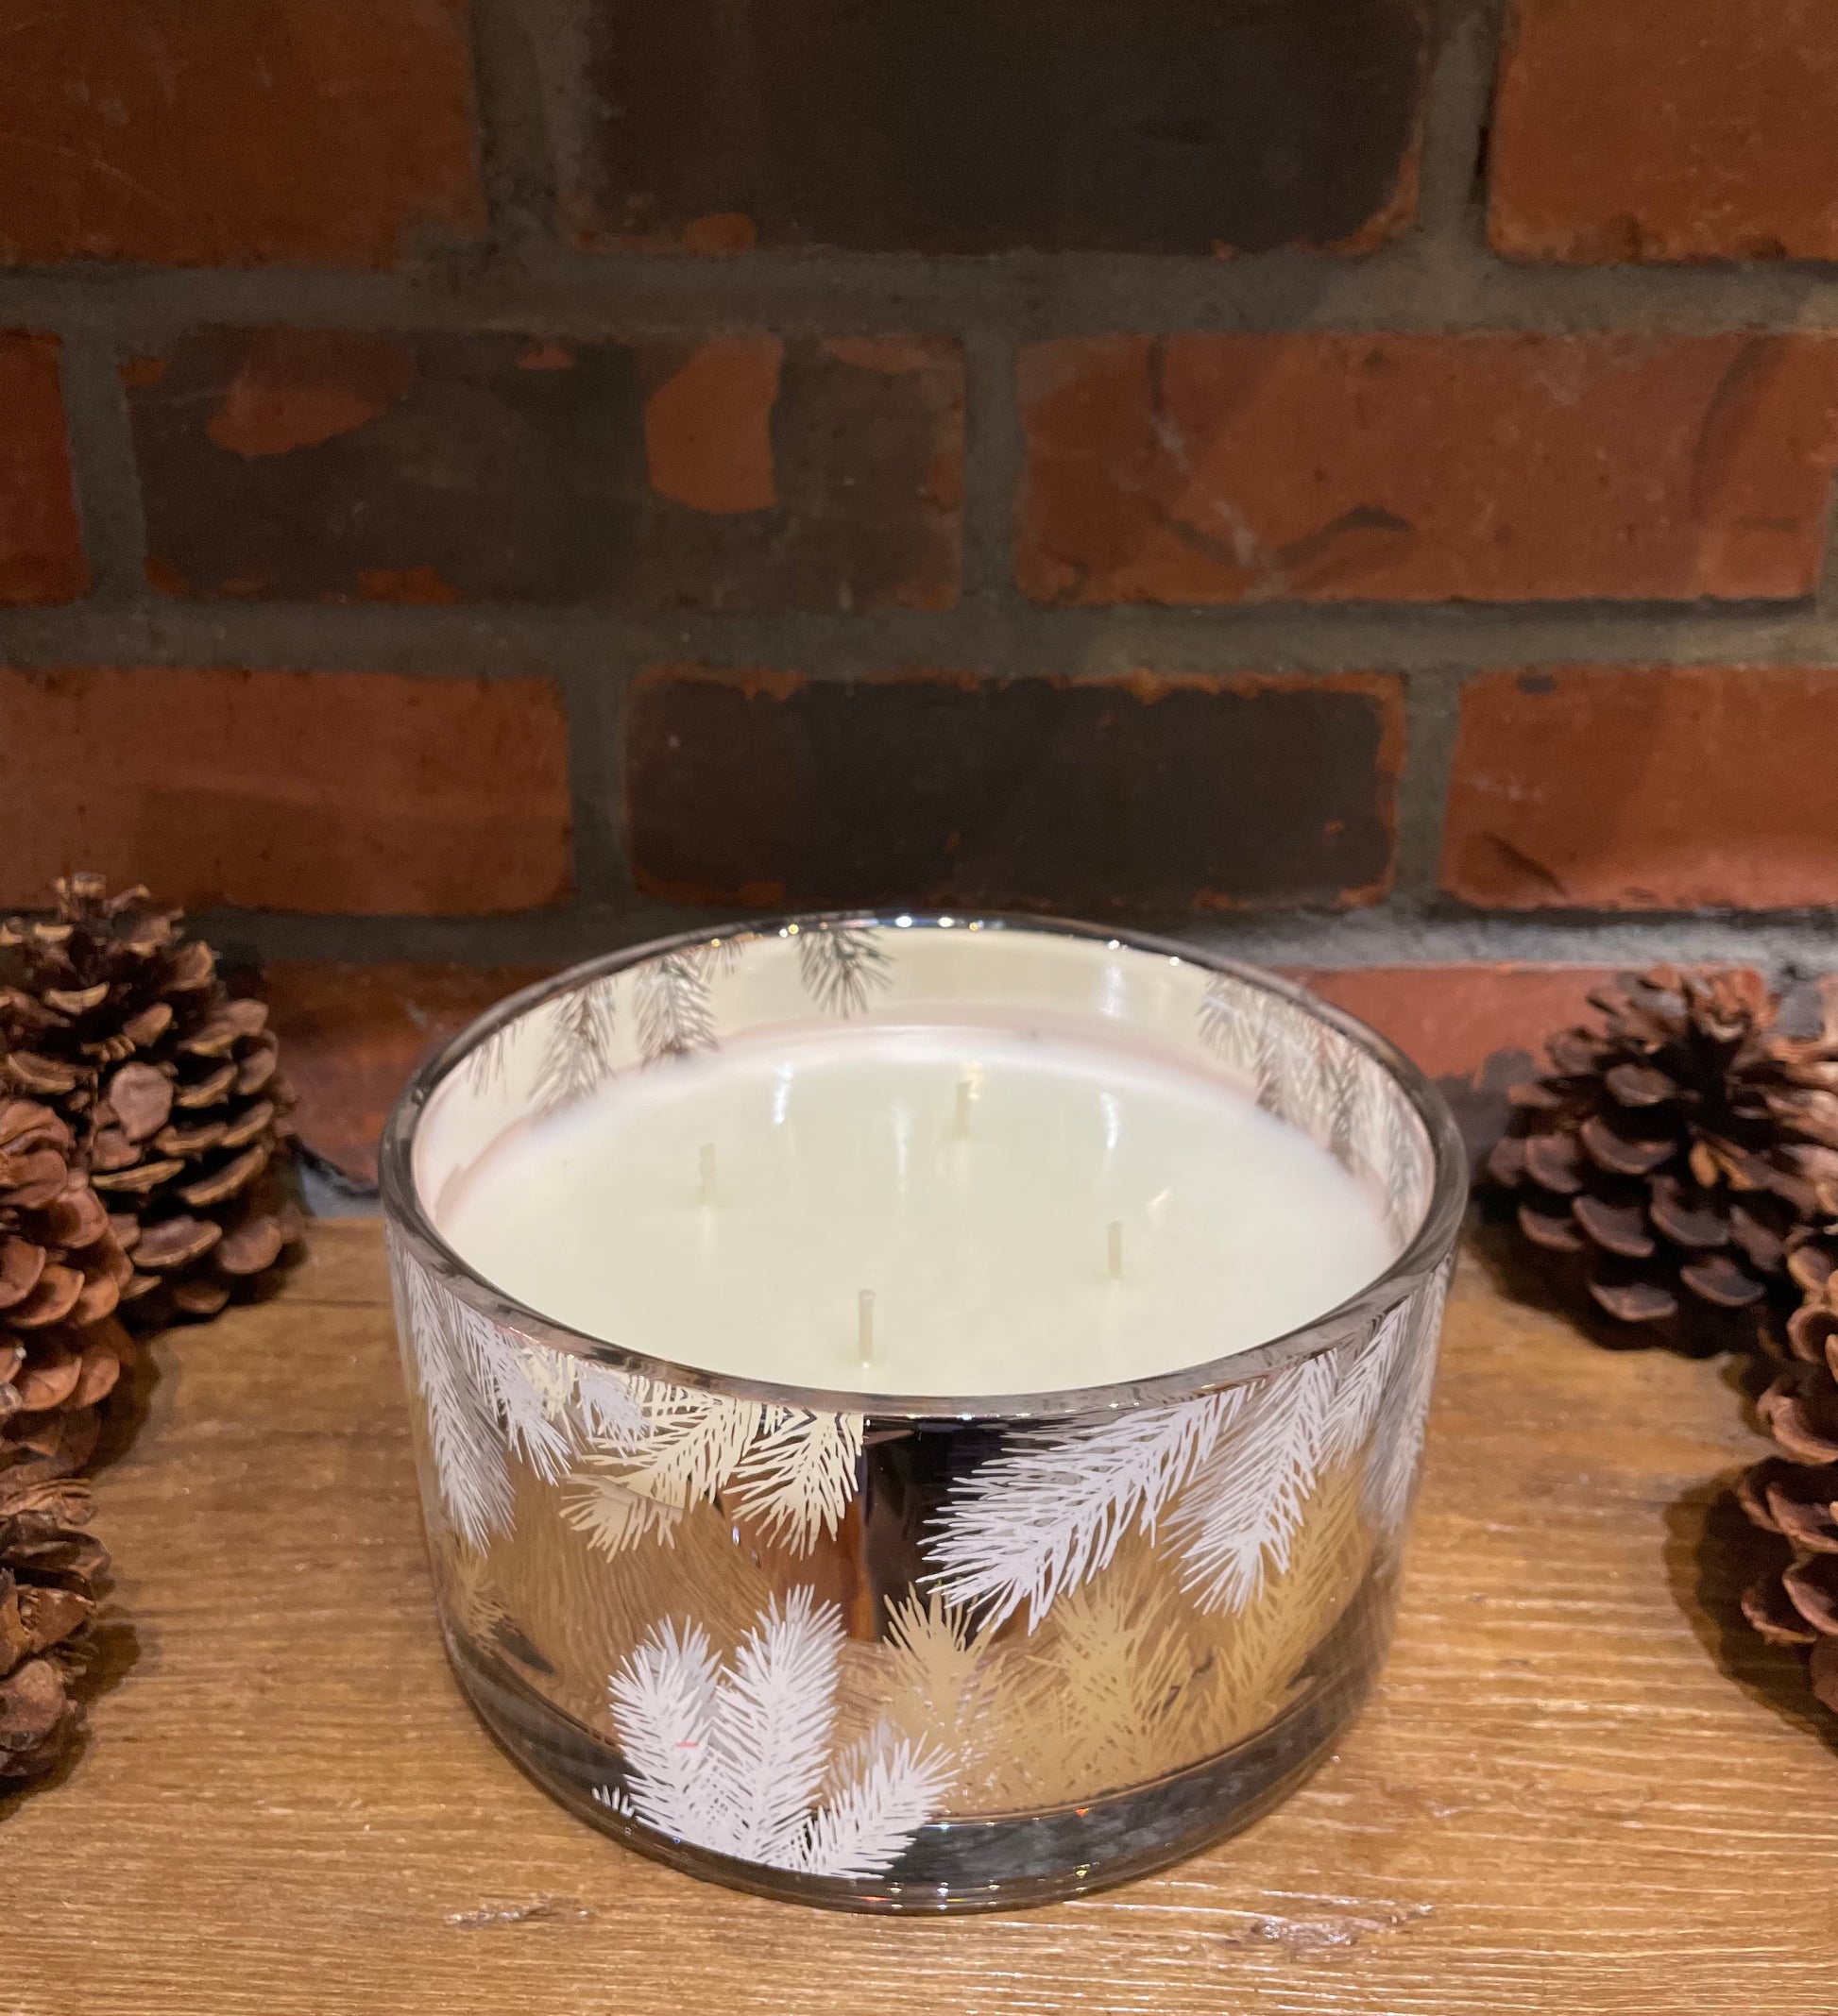 Frasier Fir Statement Poured Candle, Large 4-wick open